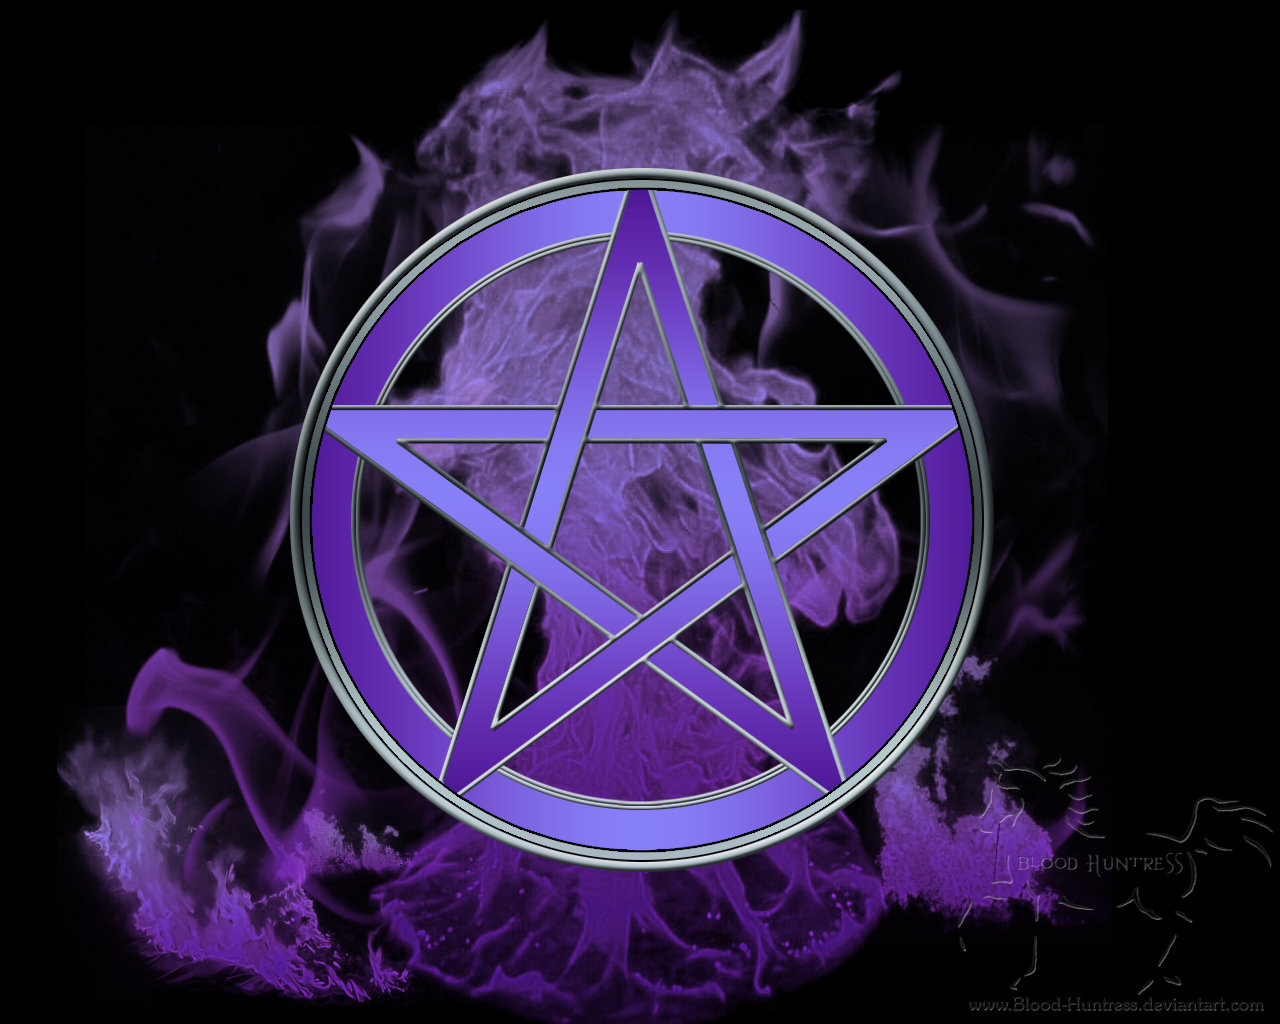 Flames Pentacle by Blood Huntress on